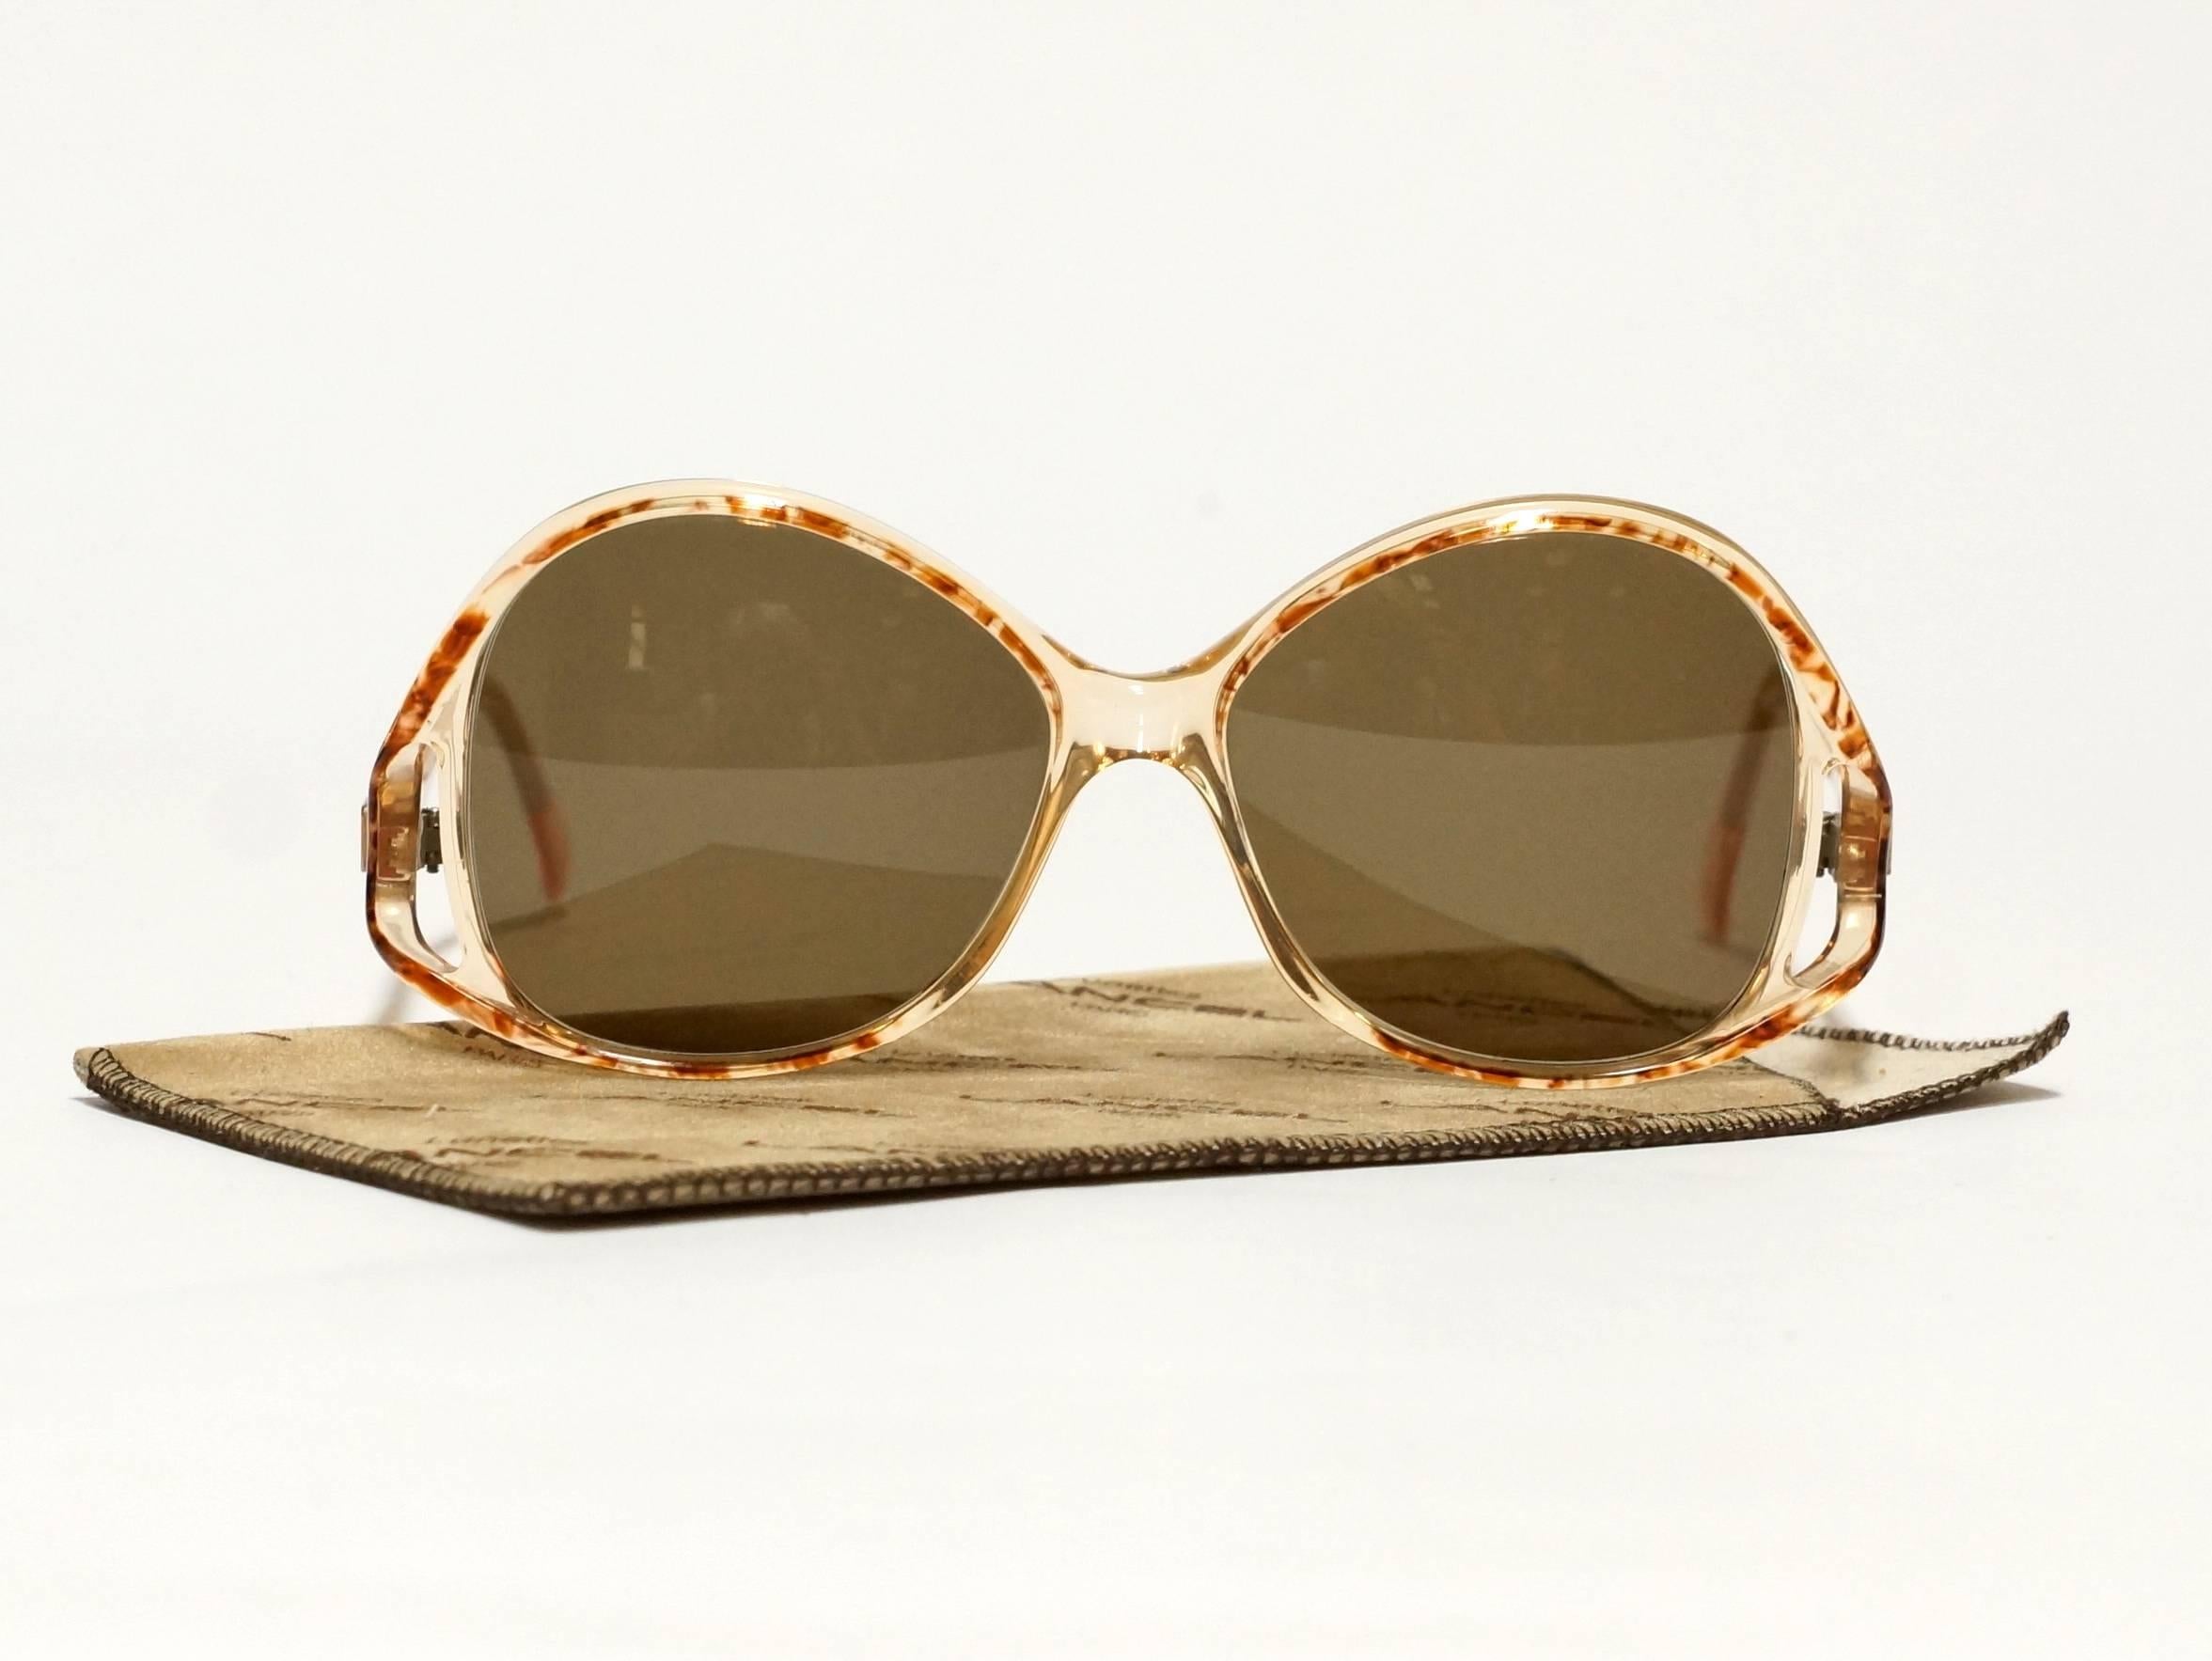 Chic and stylish French sunglasses by Lancel. Round frame with low placed temples and look through parts in new and unworn condition.
Comes with original soft case. 

Lancel stands for that quintessentially French spirit, chic, carefree and just